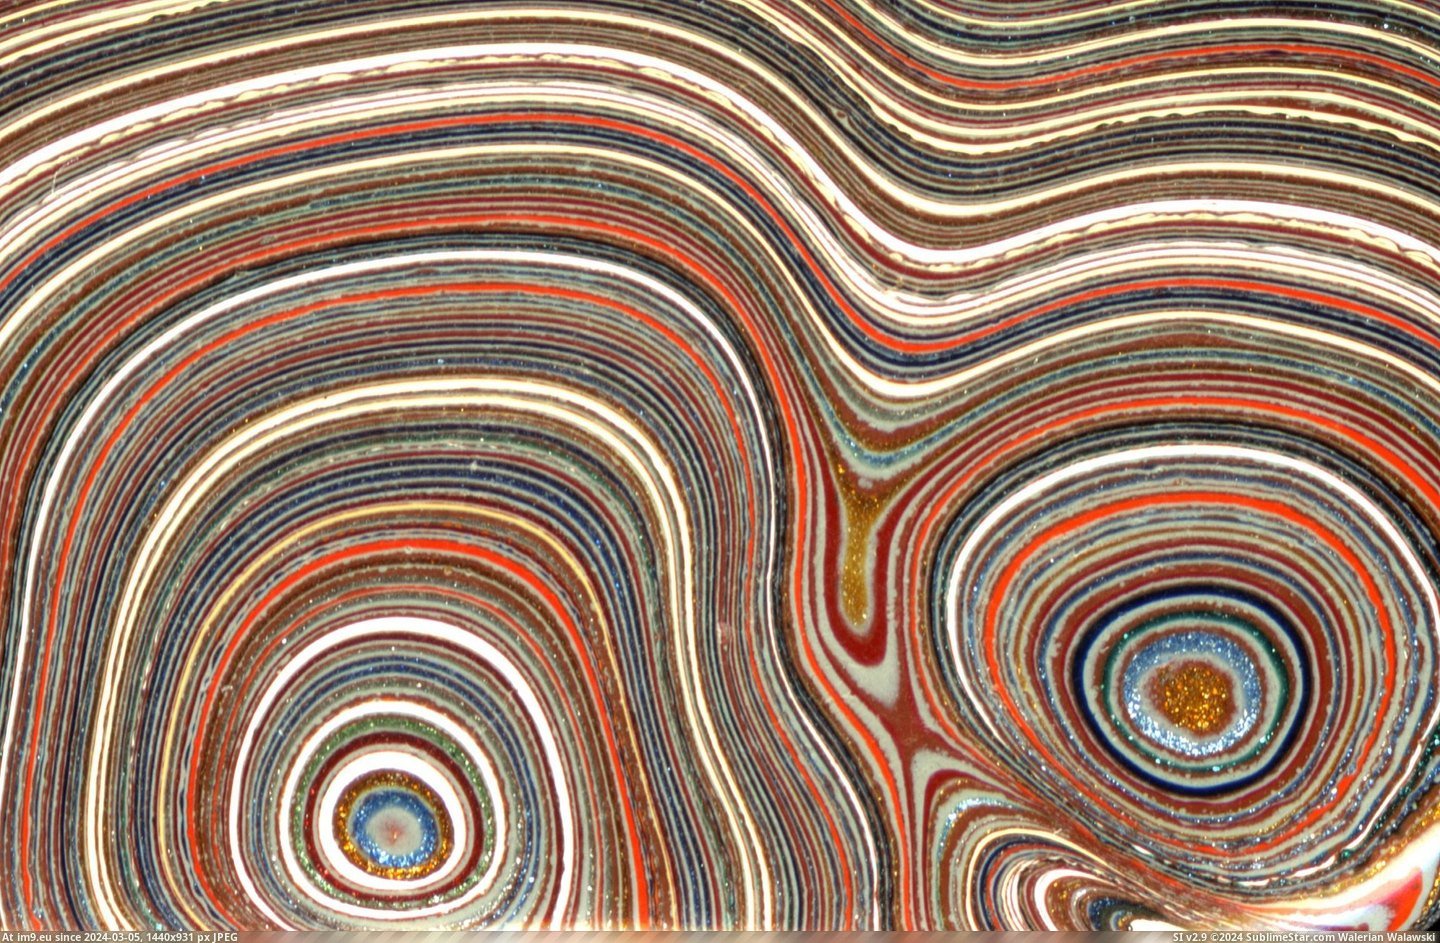 #Paint #Cars #Layers #Thousands #Agate #Enamel #Fordite #Baked #Detroit #Repeatedly [Pics] This is Fordite, or ''Detroit agate'', thousands of layers of repeatedly baked enamel paint from the days when cars were  Pic. (Image of album My r/PICS favs))